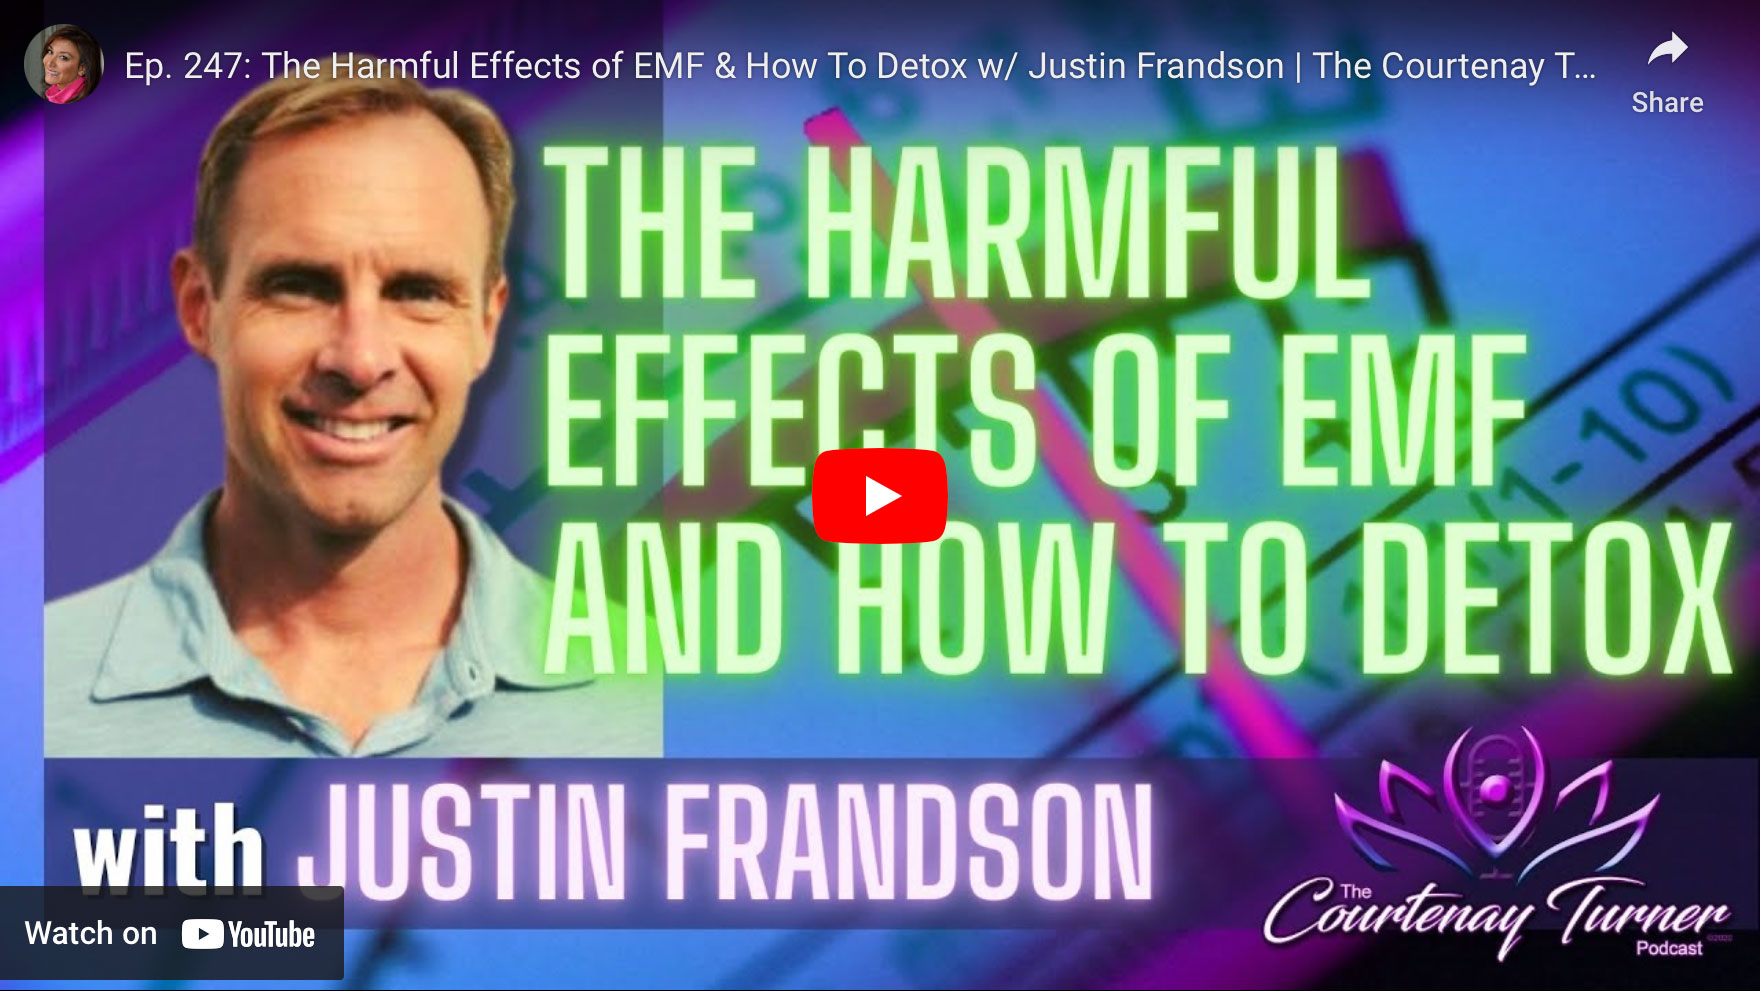 The Harmful Effects of EMF & How To Detox w/ Justin Frandson | The Courtenay Turner Podcast